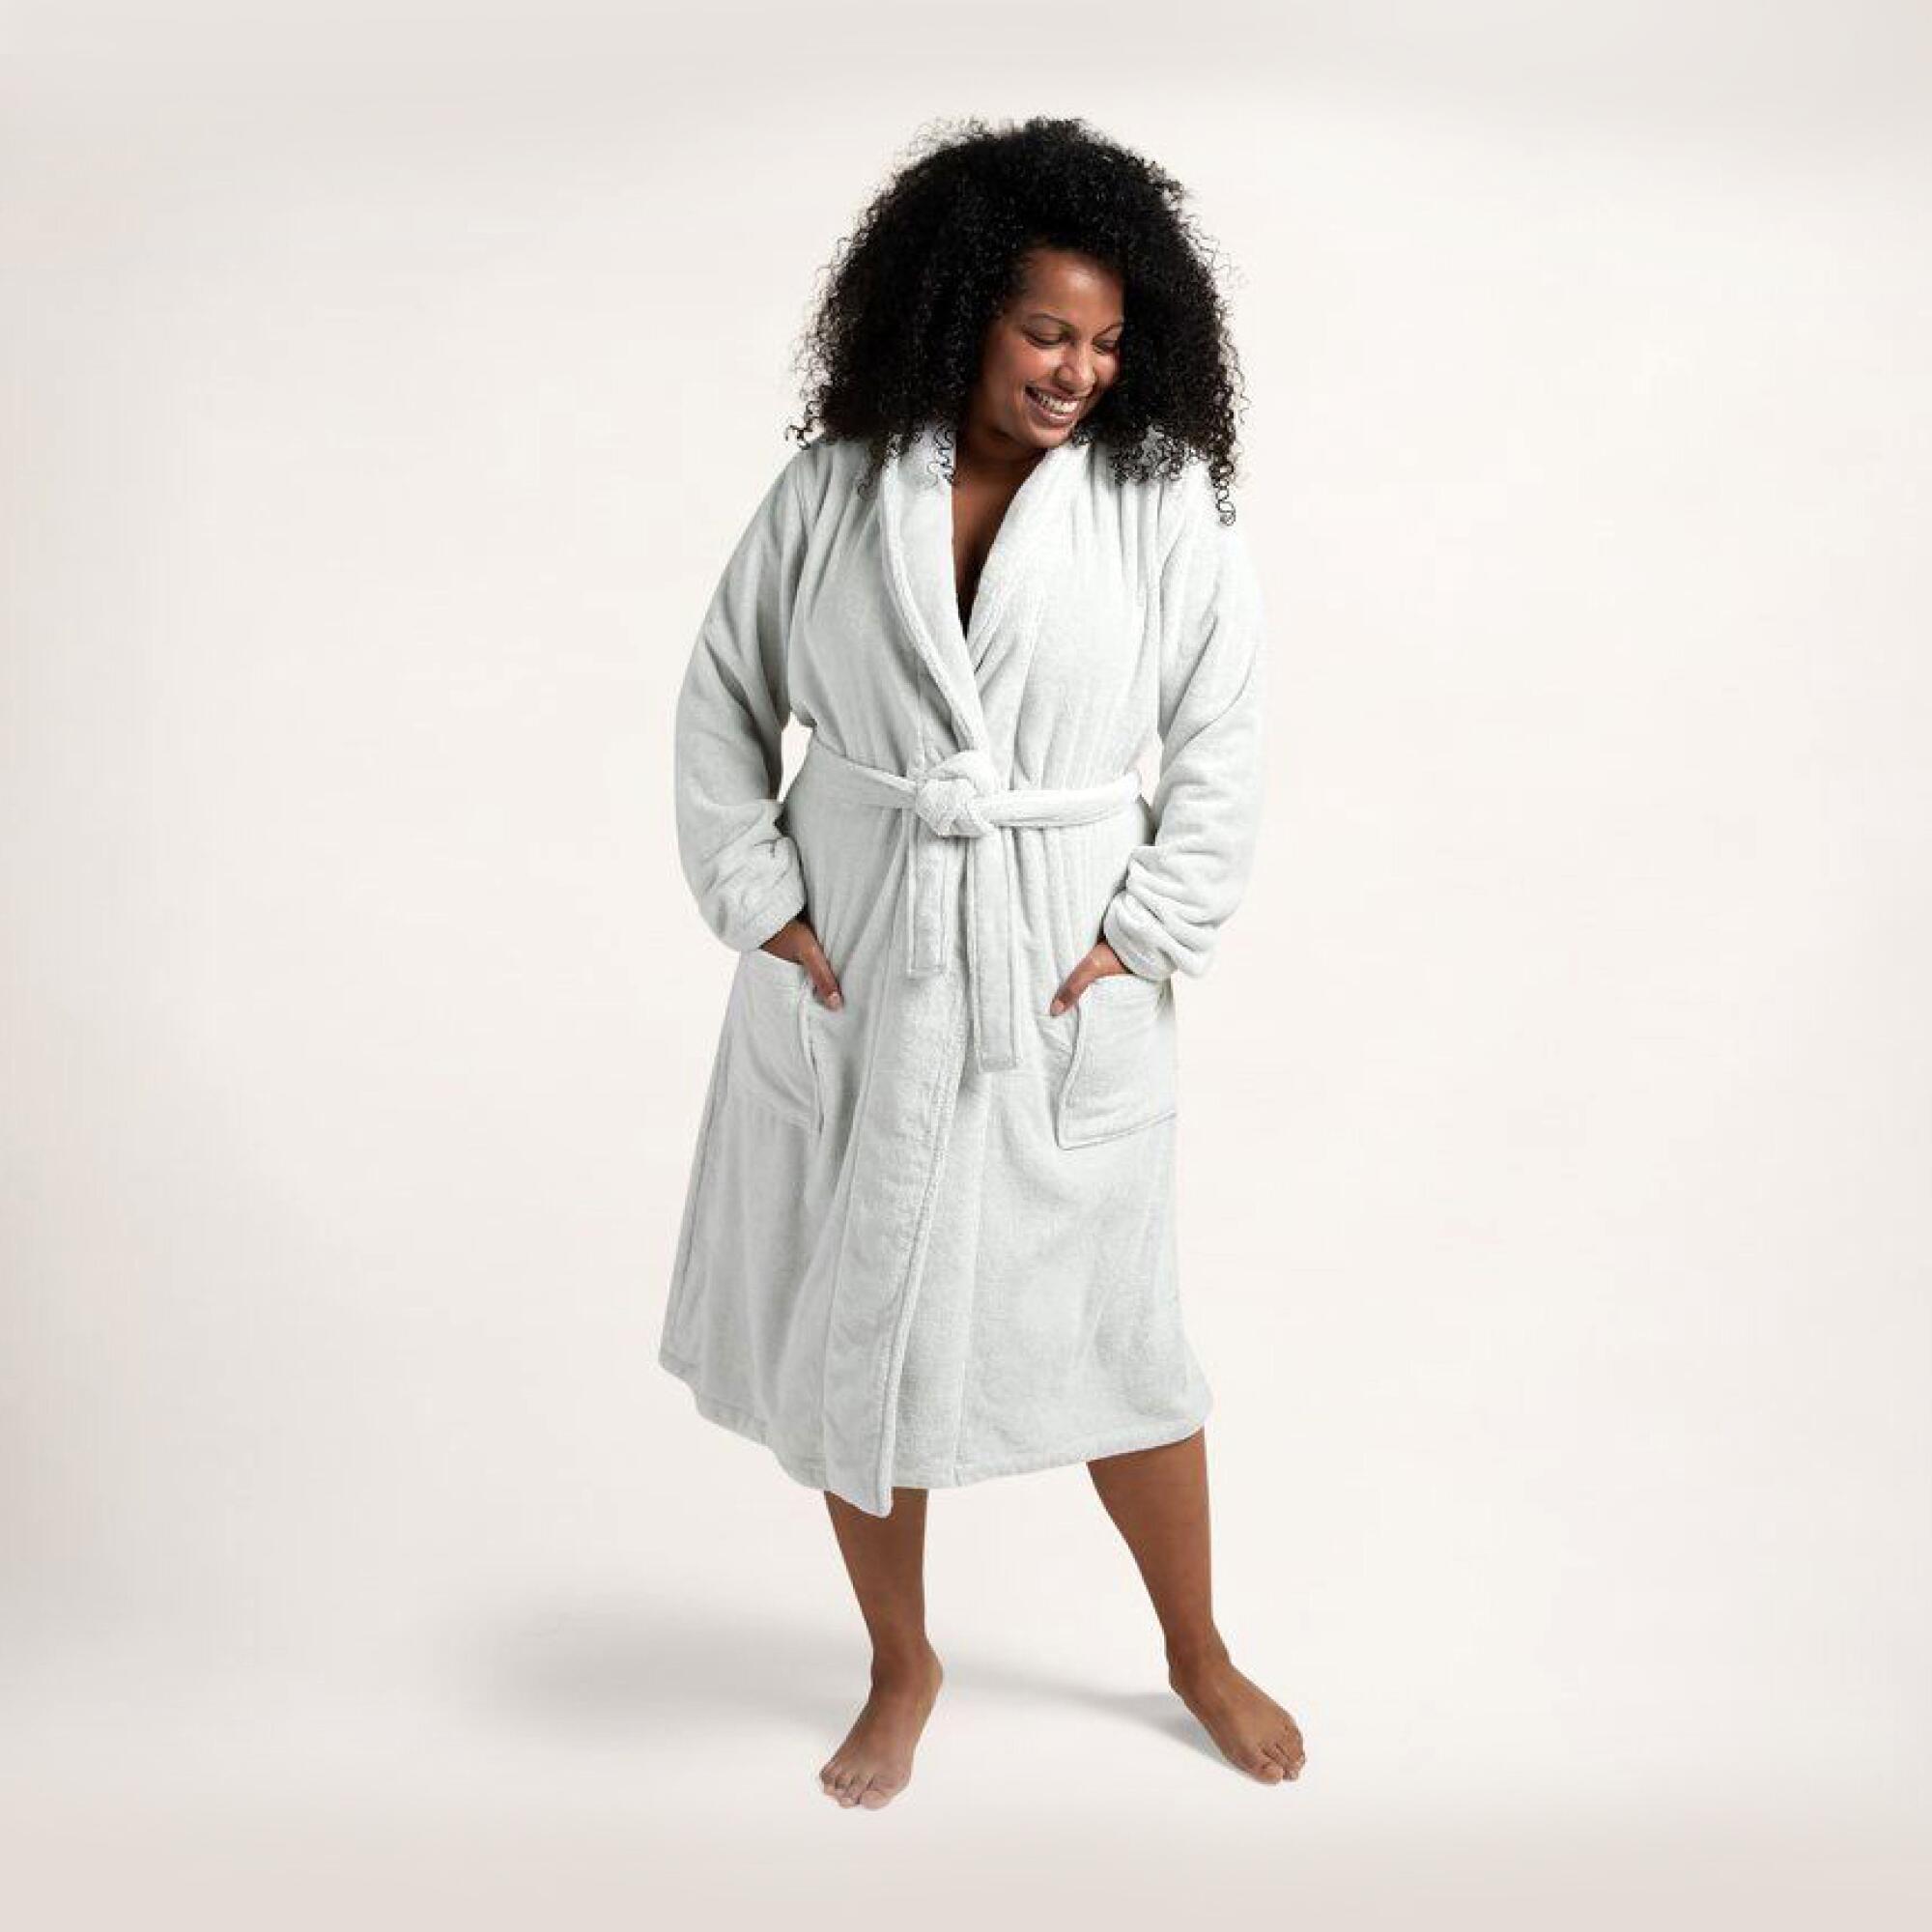 Classic Robe by Parachute Home. $99